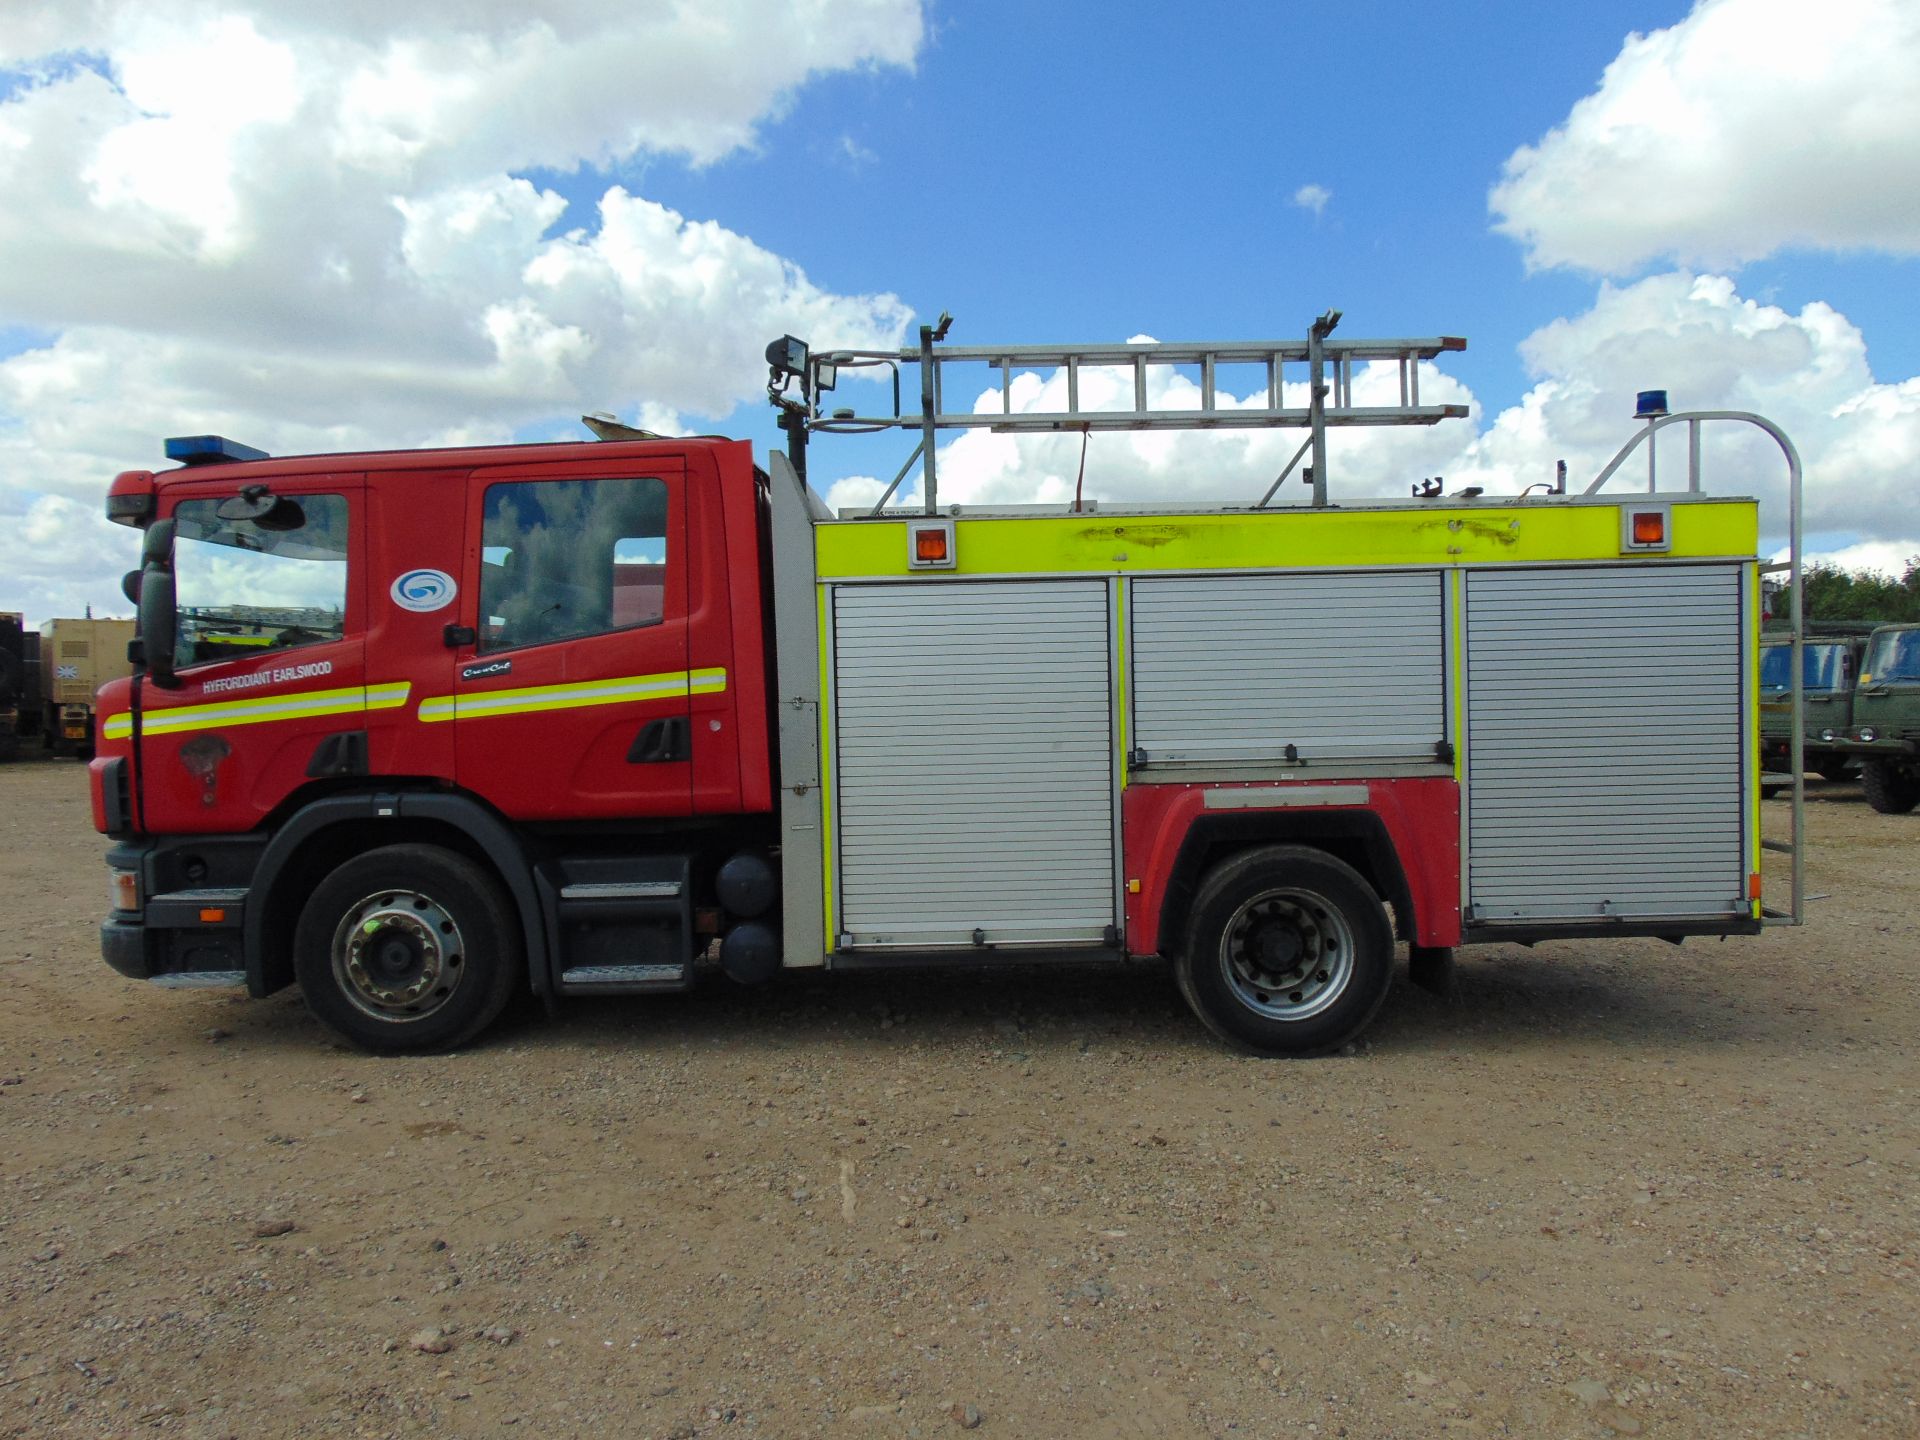 Scania 94D 260 Excalibur Fire Engine - Image 4 of 18